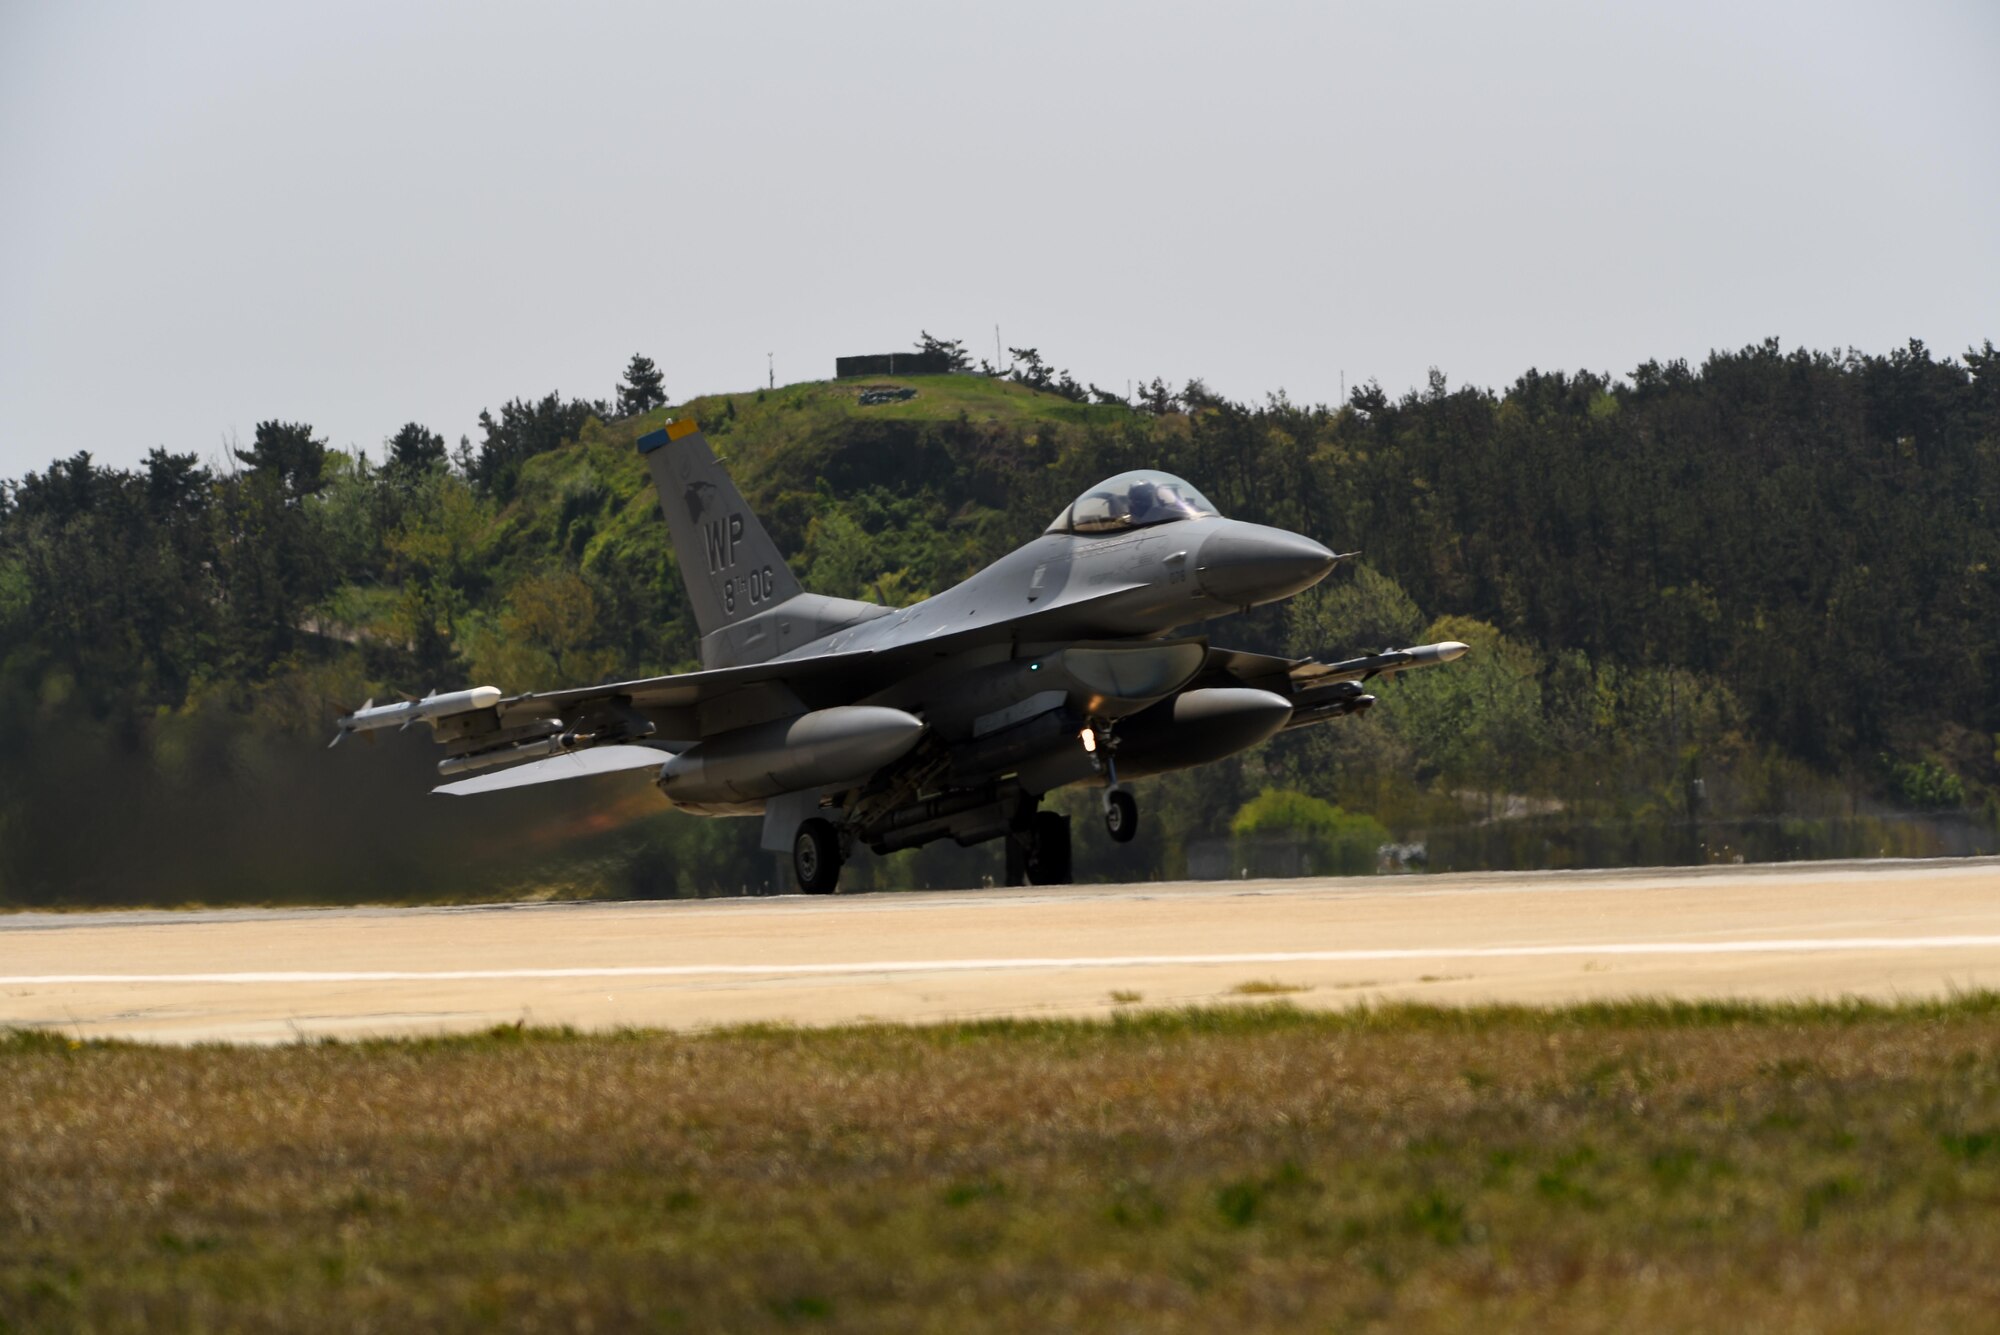 A U.S. Air Force F-16 Fighting Falcon takes off during Exercise MAX THUNDER 17 at Kunsan Air Base, Republic of Korea, April 27, 2017. Max Thunder is a regularly scheduled training exercise designed to enhance the readiness of U.S. and ROK forces to defend the Republic of Korea. (U.S. Air Force photo by Tech. Sgt. Jeff Andrejcik/Released)